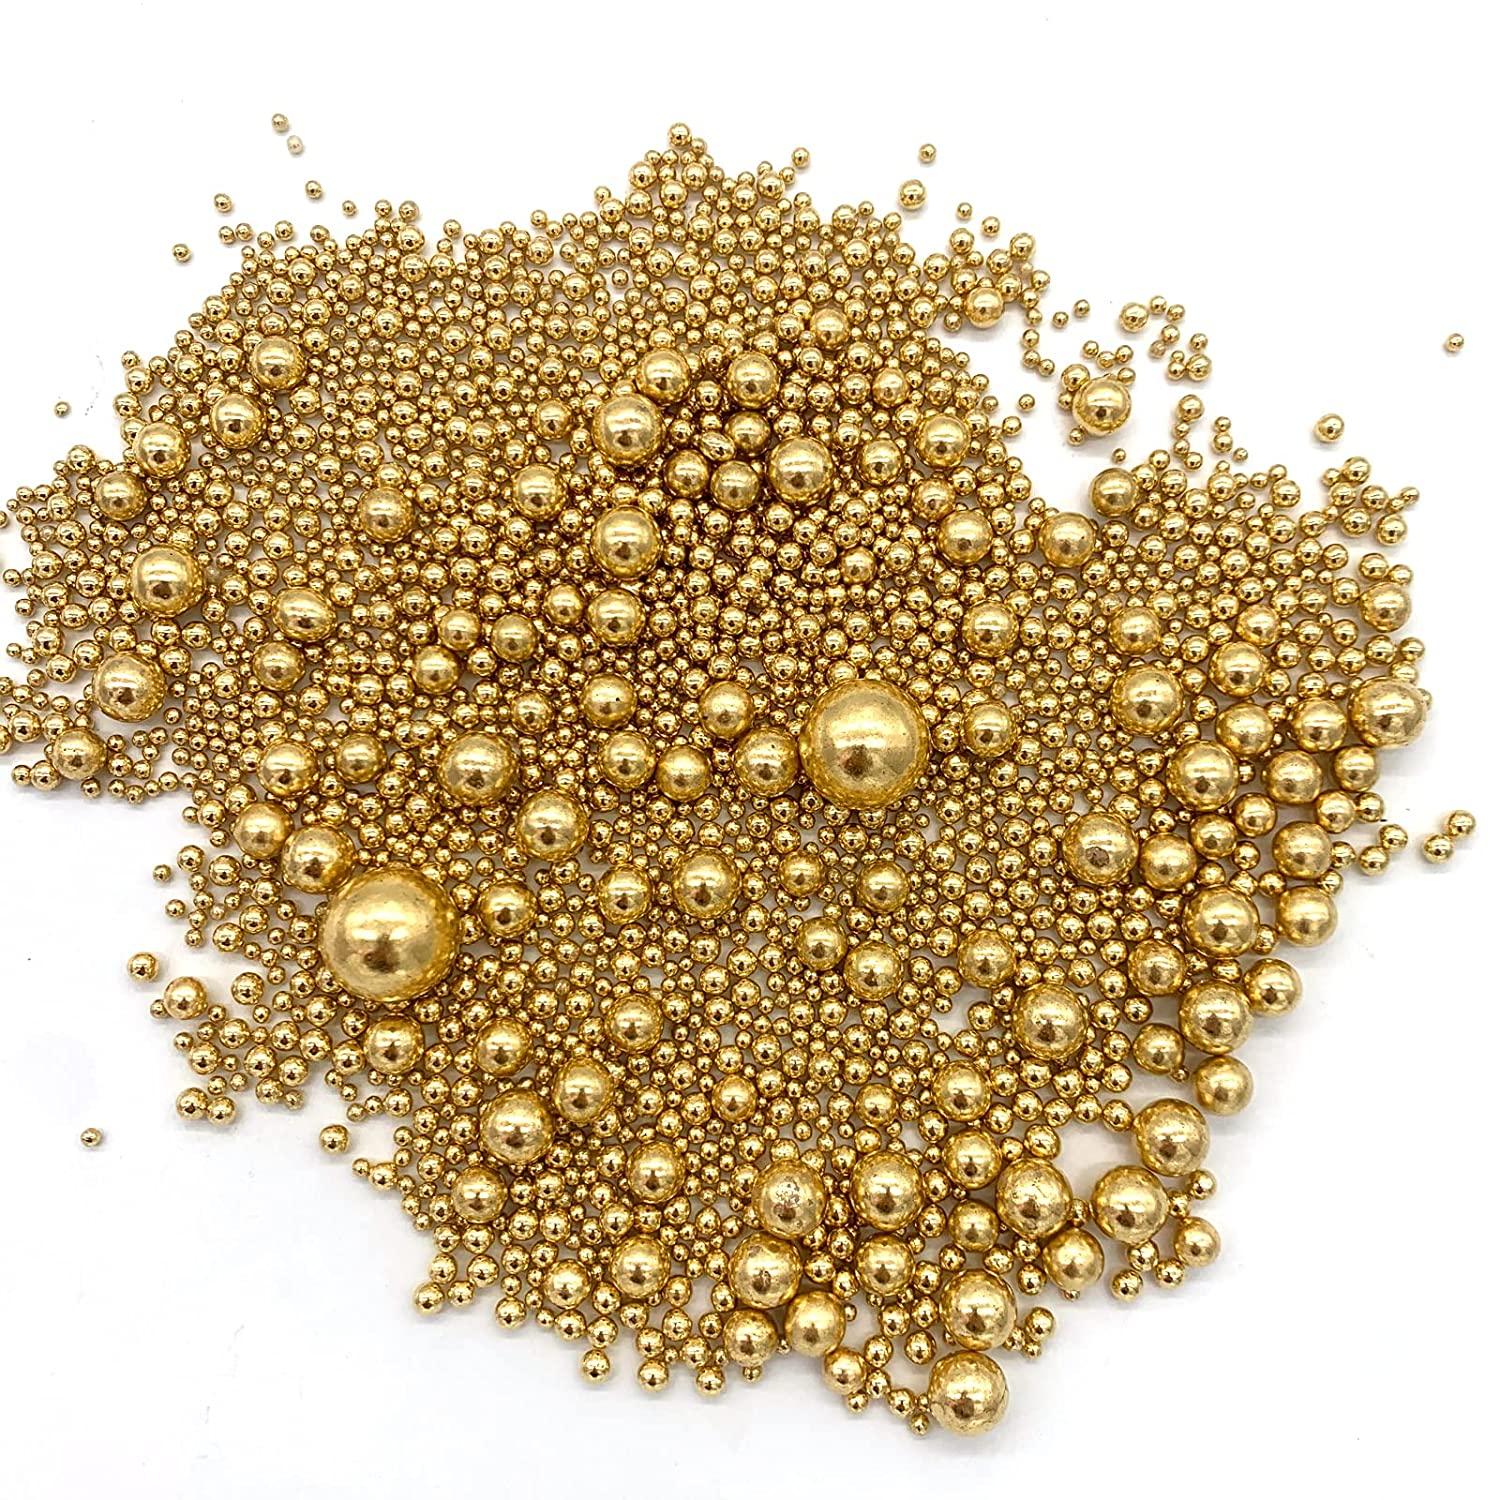 Edible Pearl Sugar Sprinkles Gold Candy 120g/ 4.2oz Baking Edible Cake  Decorations Cupcake Toppers Cookie